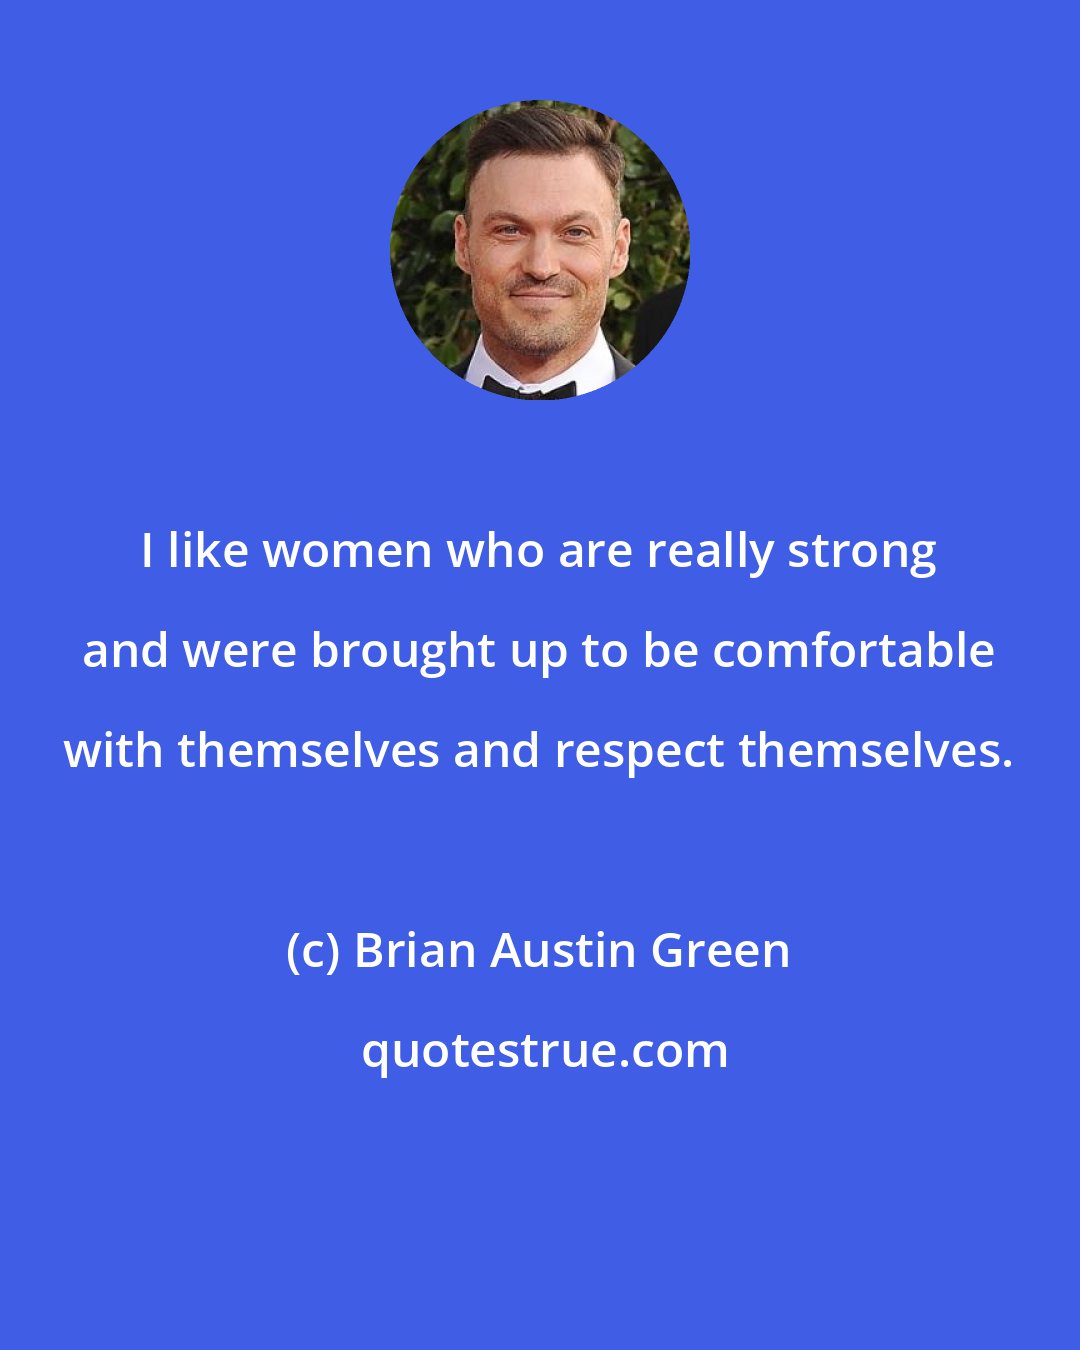 Brian Austin Green: I like women who are really strong and were brought up to be comfortable with themselves and respect themselves.